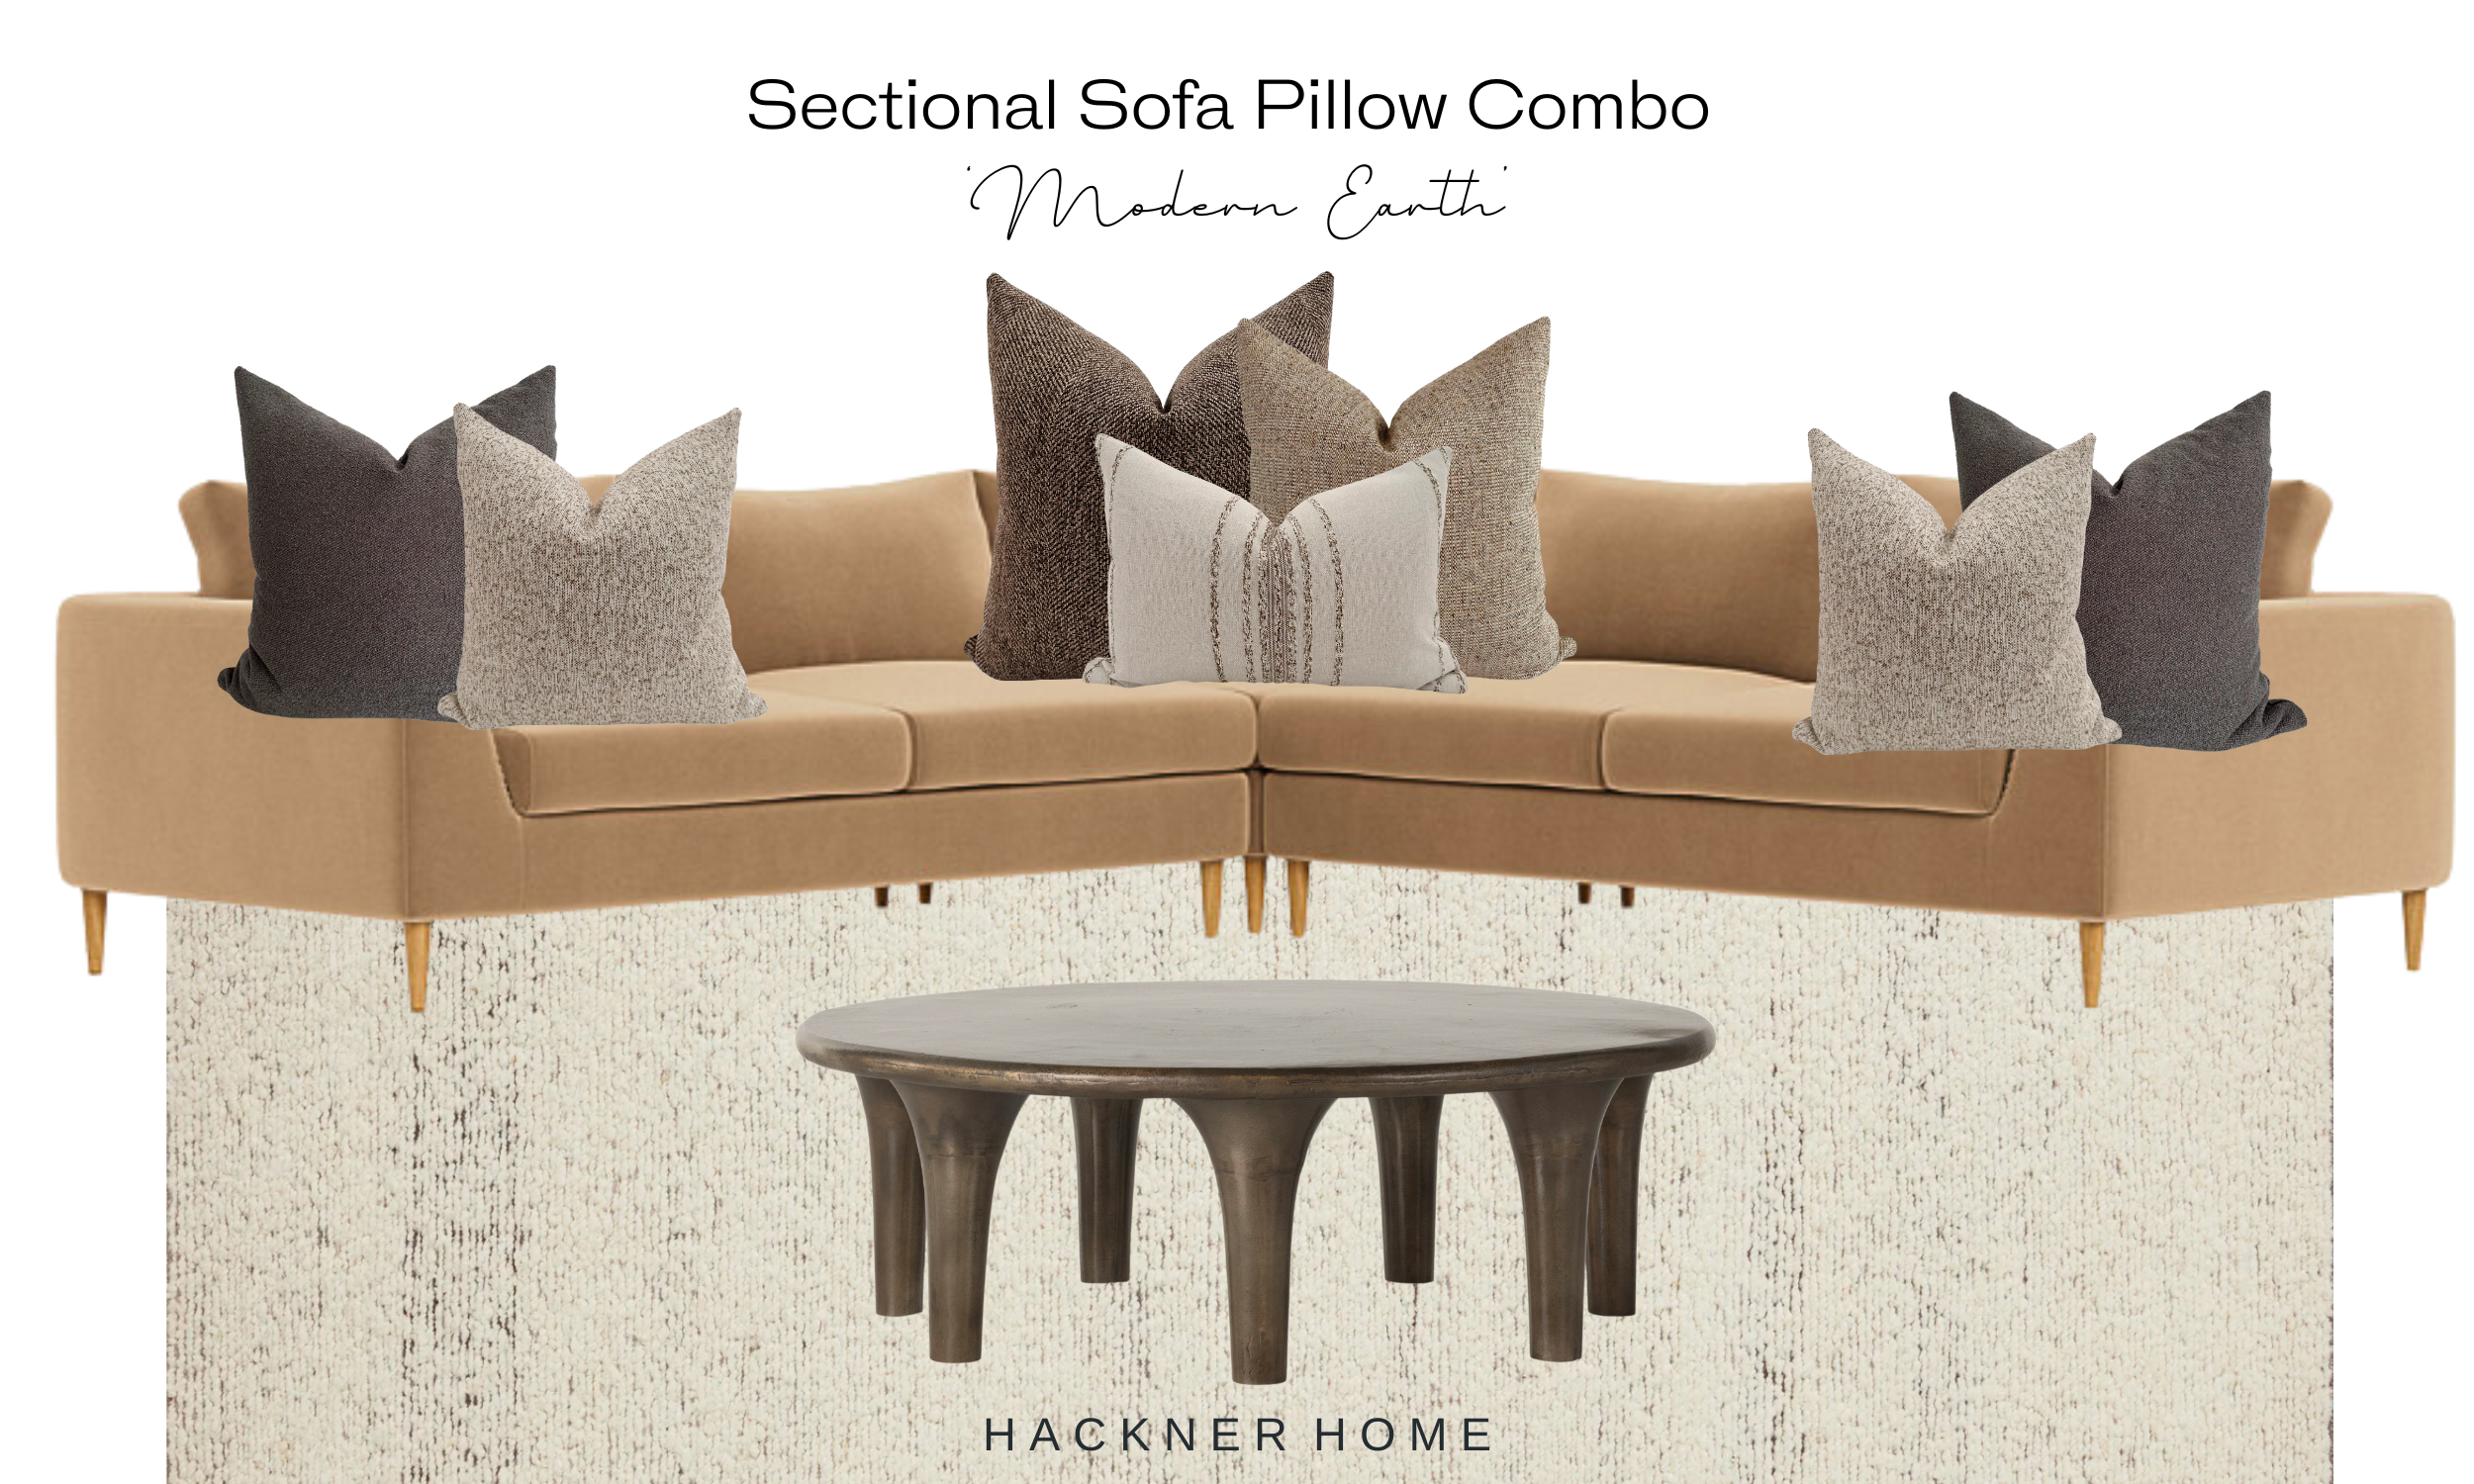 How Many Throw Pillows Should You Put on Your Sectional